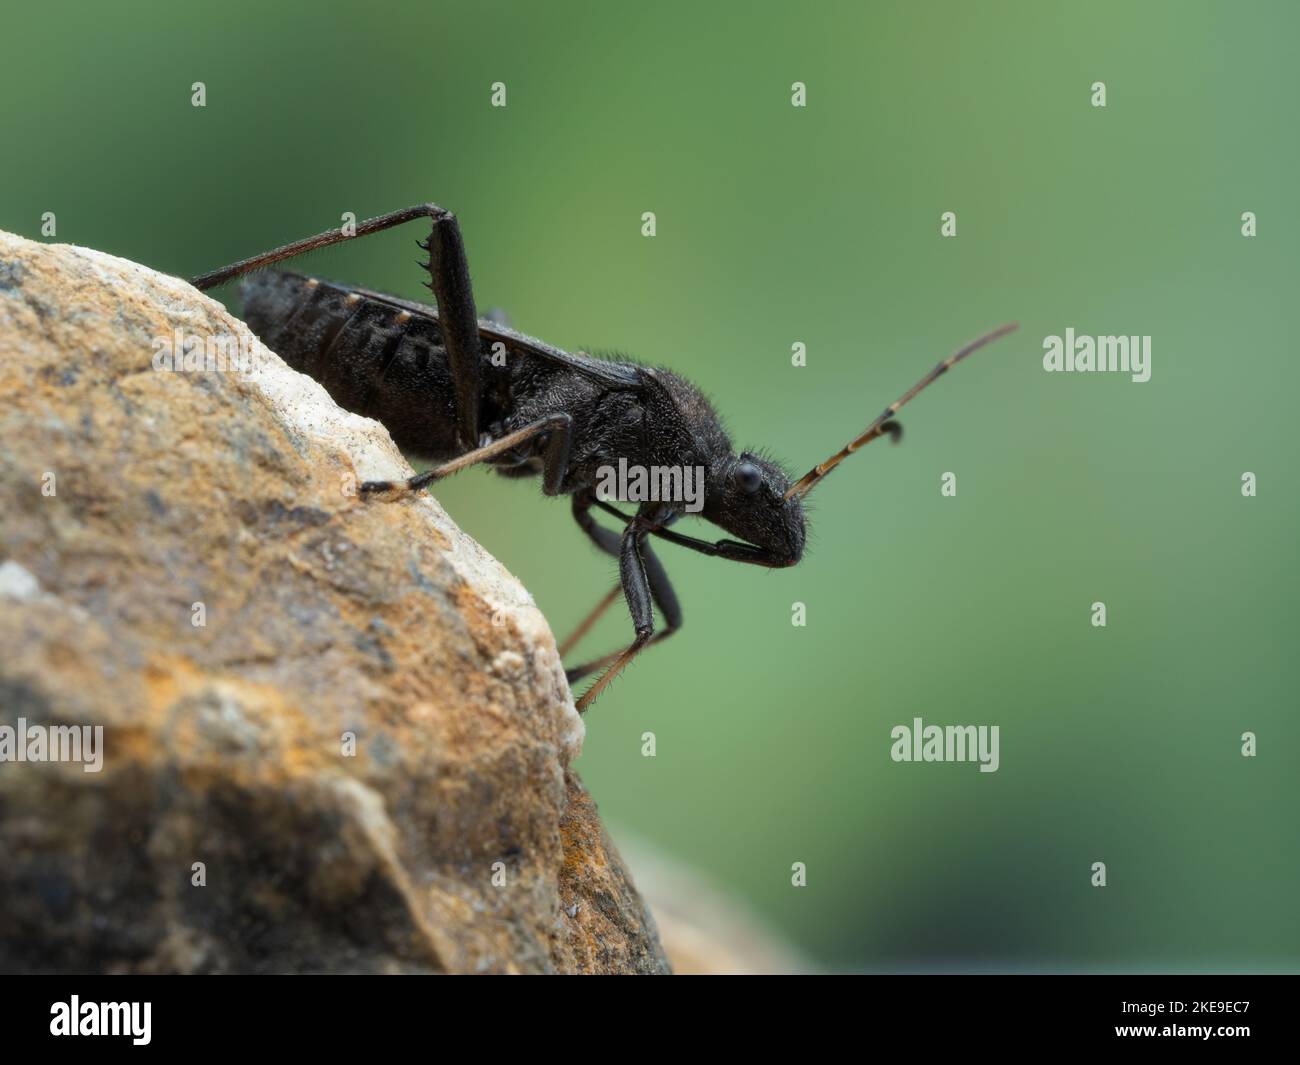 close-up side view of an adult masked hunter assassin bug (Reduvius personatus) crawling on a rock Stock Photo